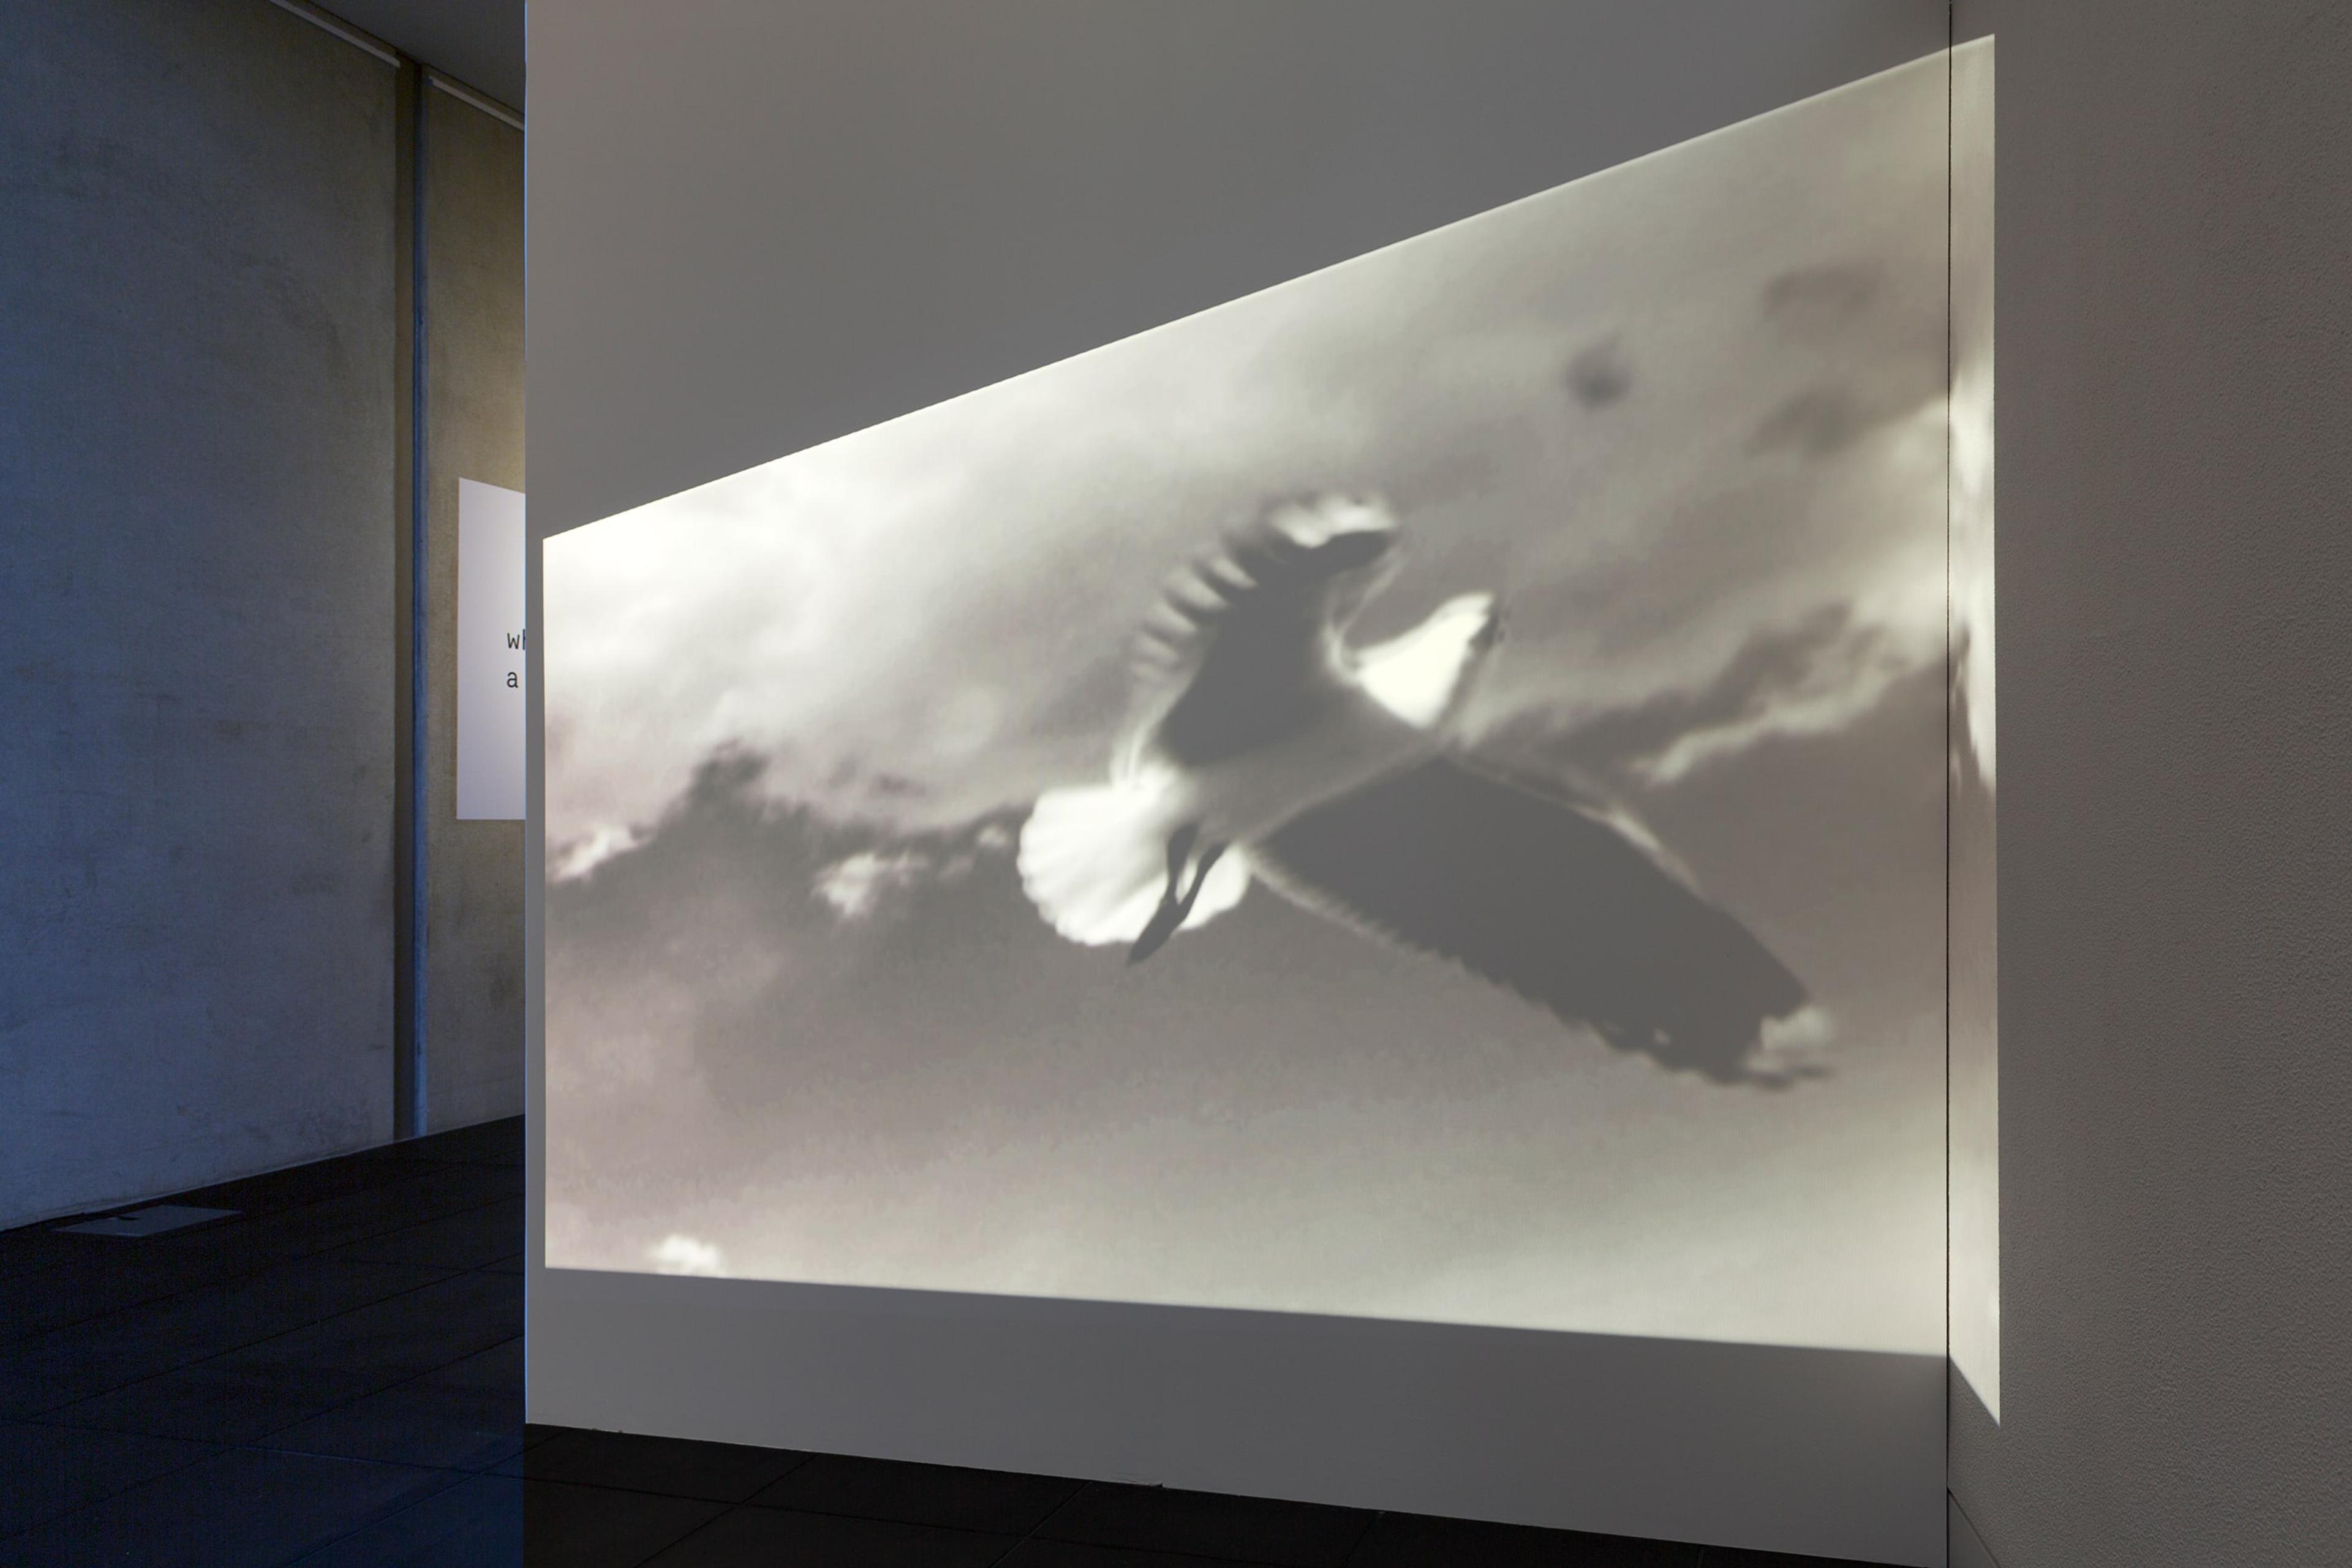 Kim Pieters, Halo (2010), digital video, audio by Edie Stevens, in the exhibition what is a life? kim Pieters at the Adam Art Gallery, Victoria University of Wellington (photo: Shaun Waugh)